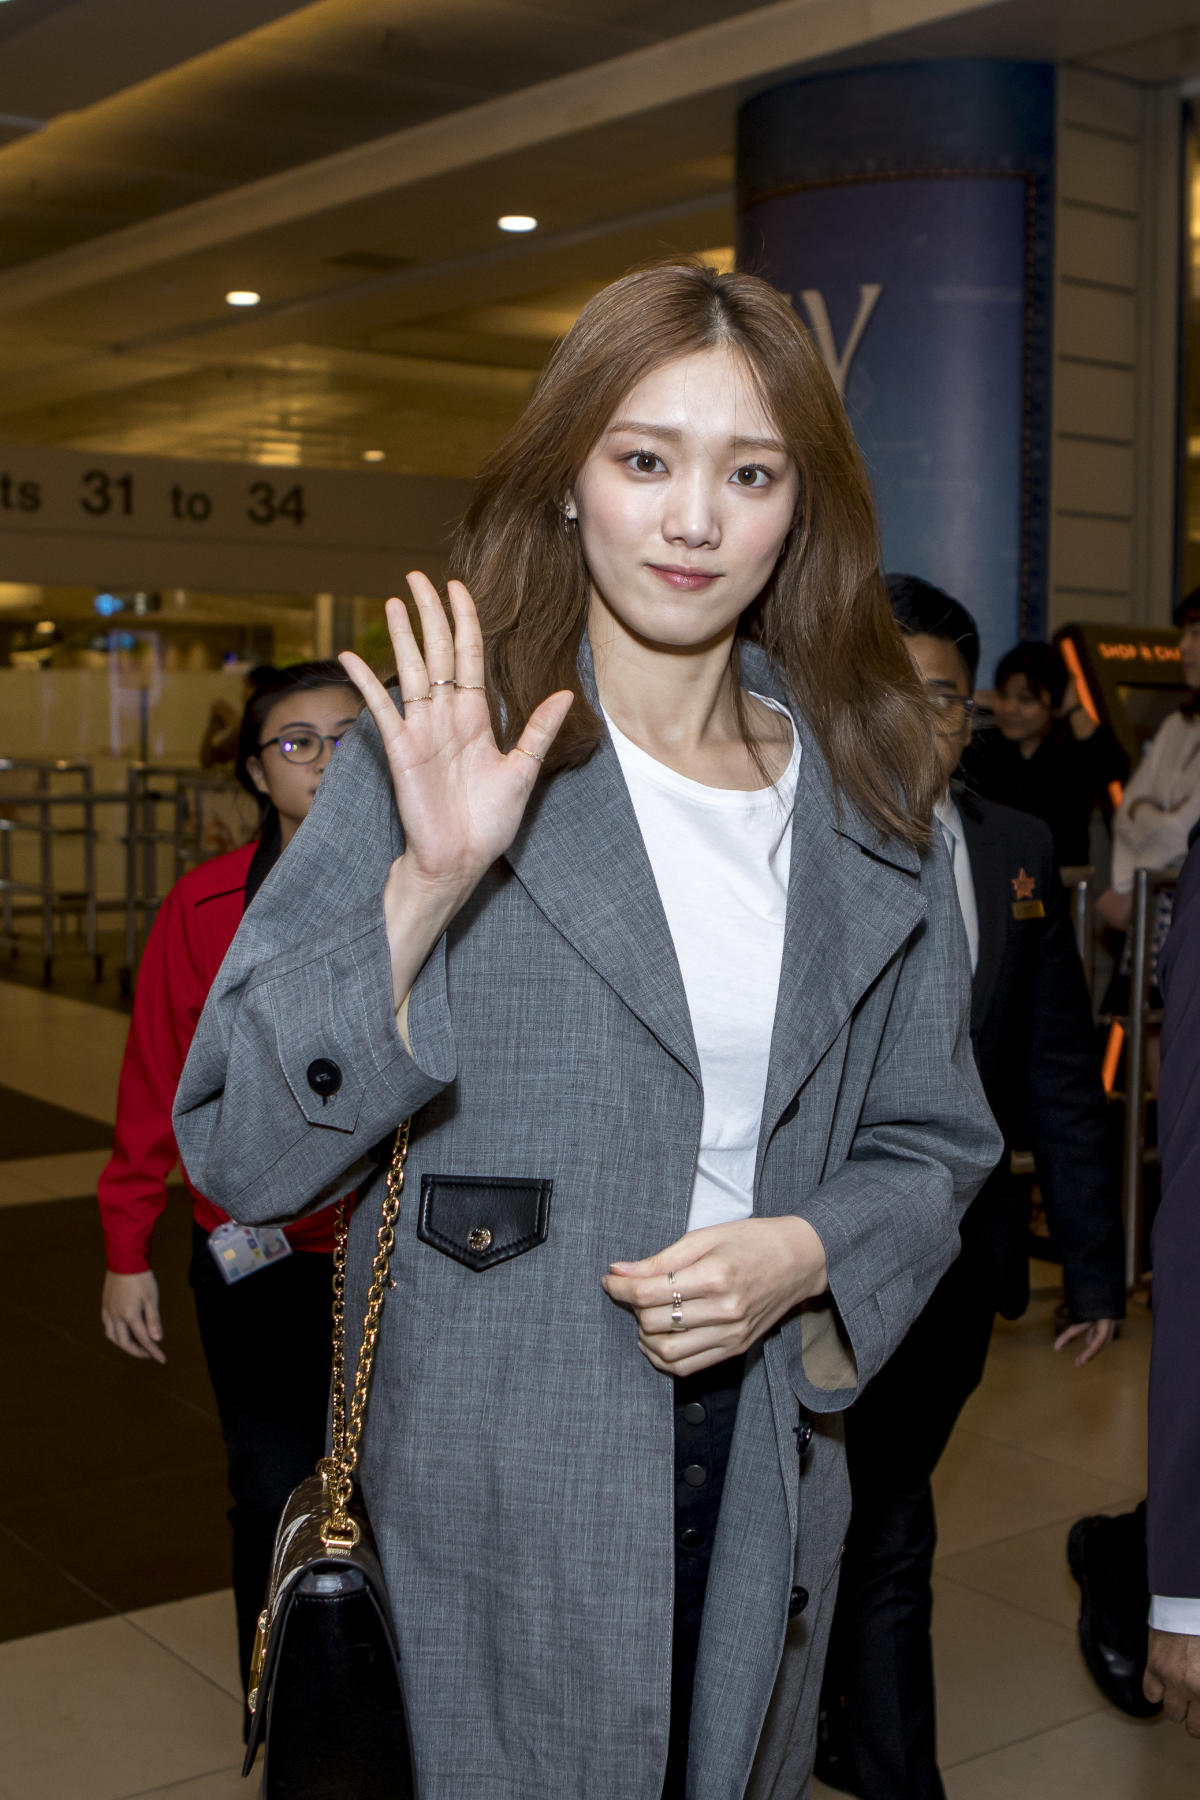 Lee Sung Kyung In Singapore For Louis Vuitton Exhibition